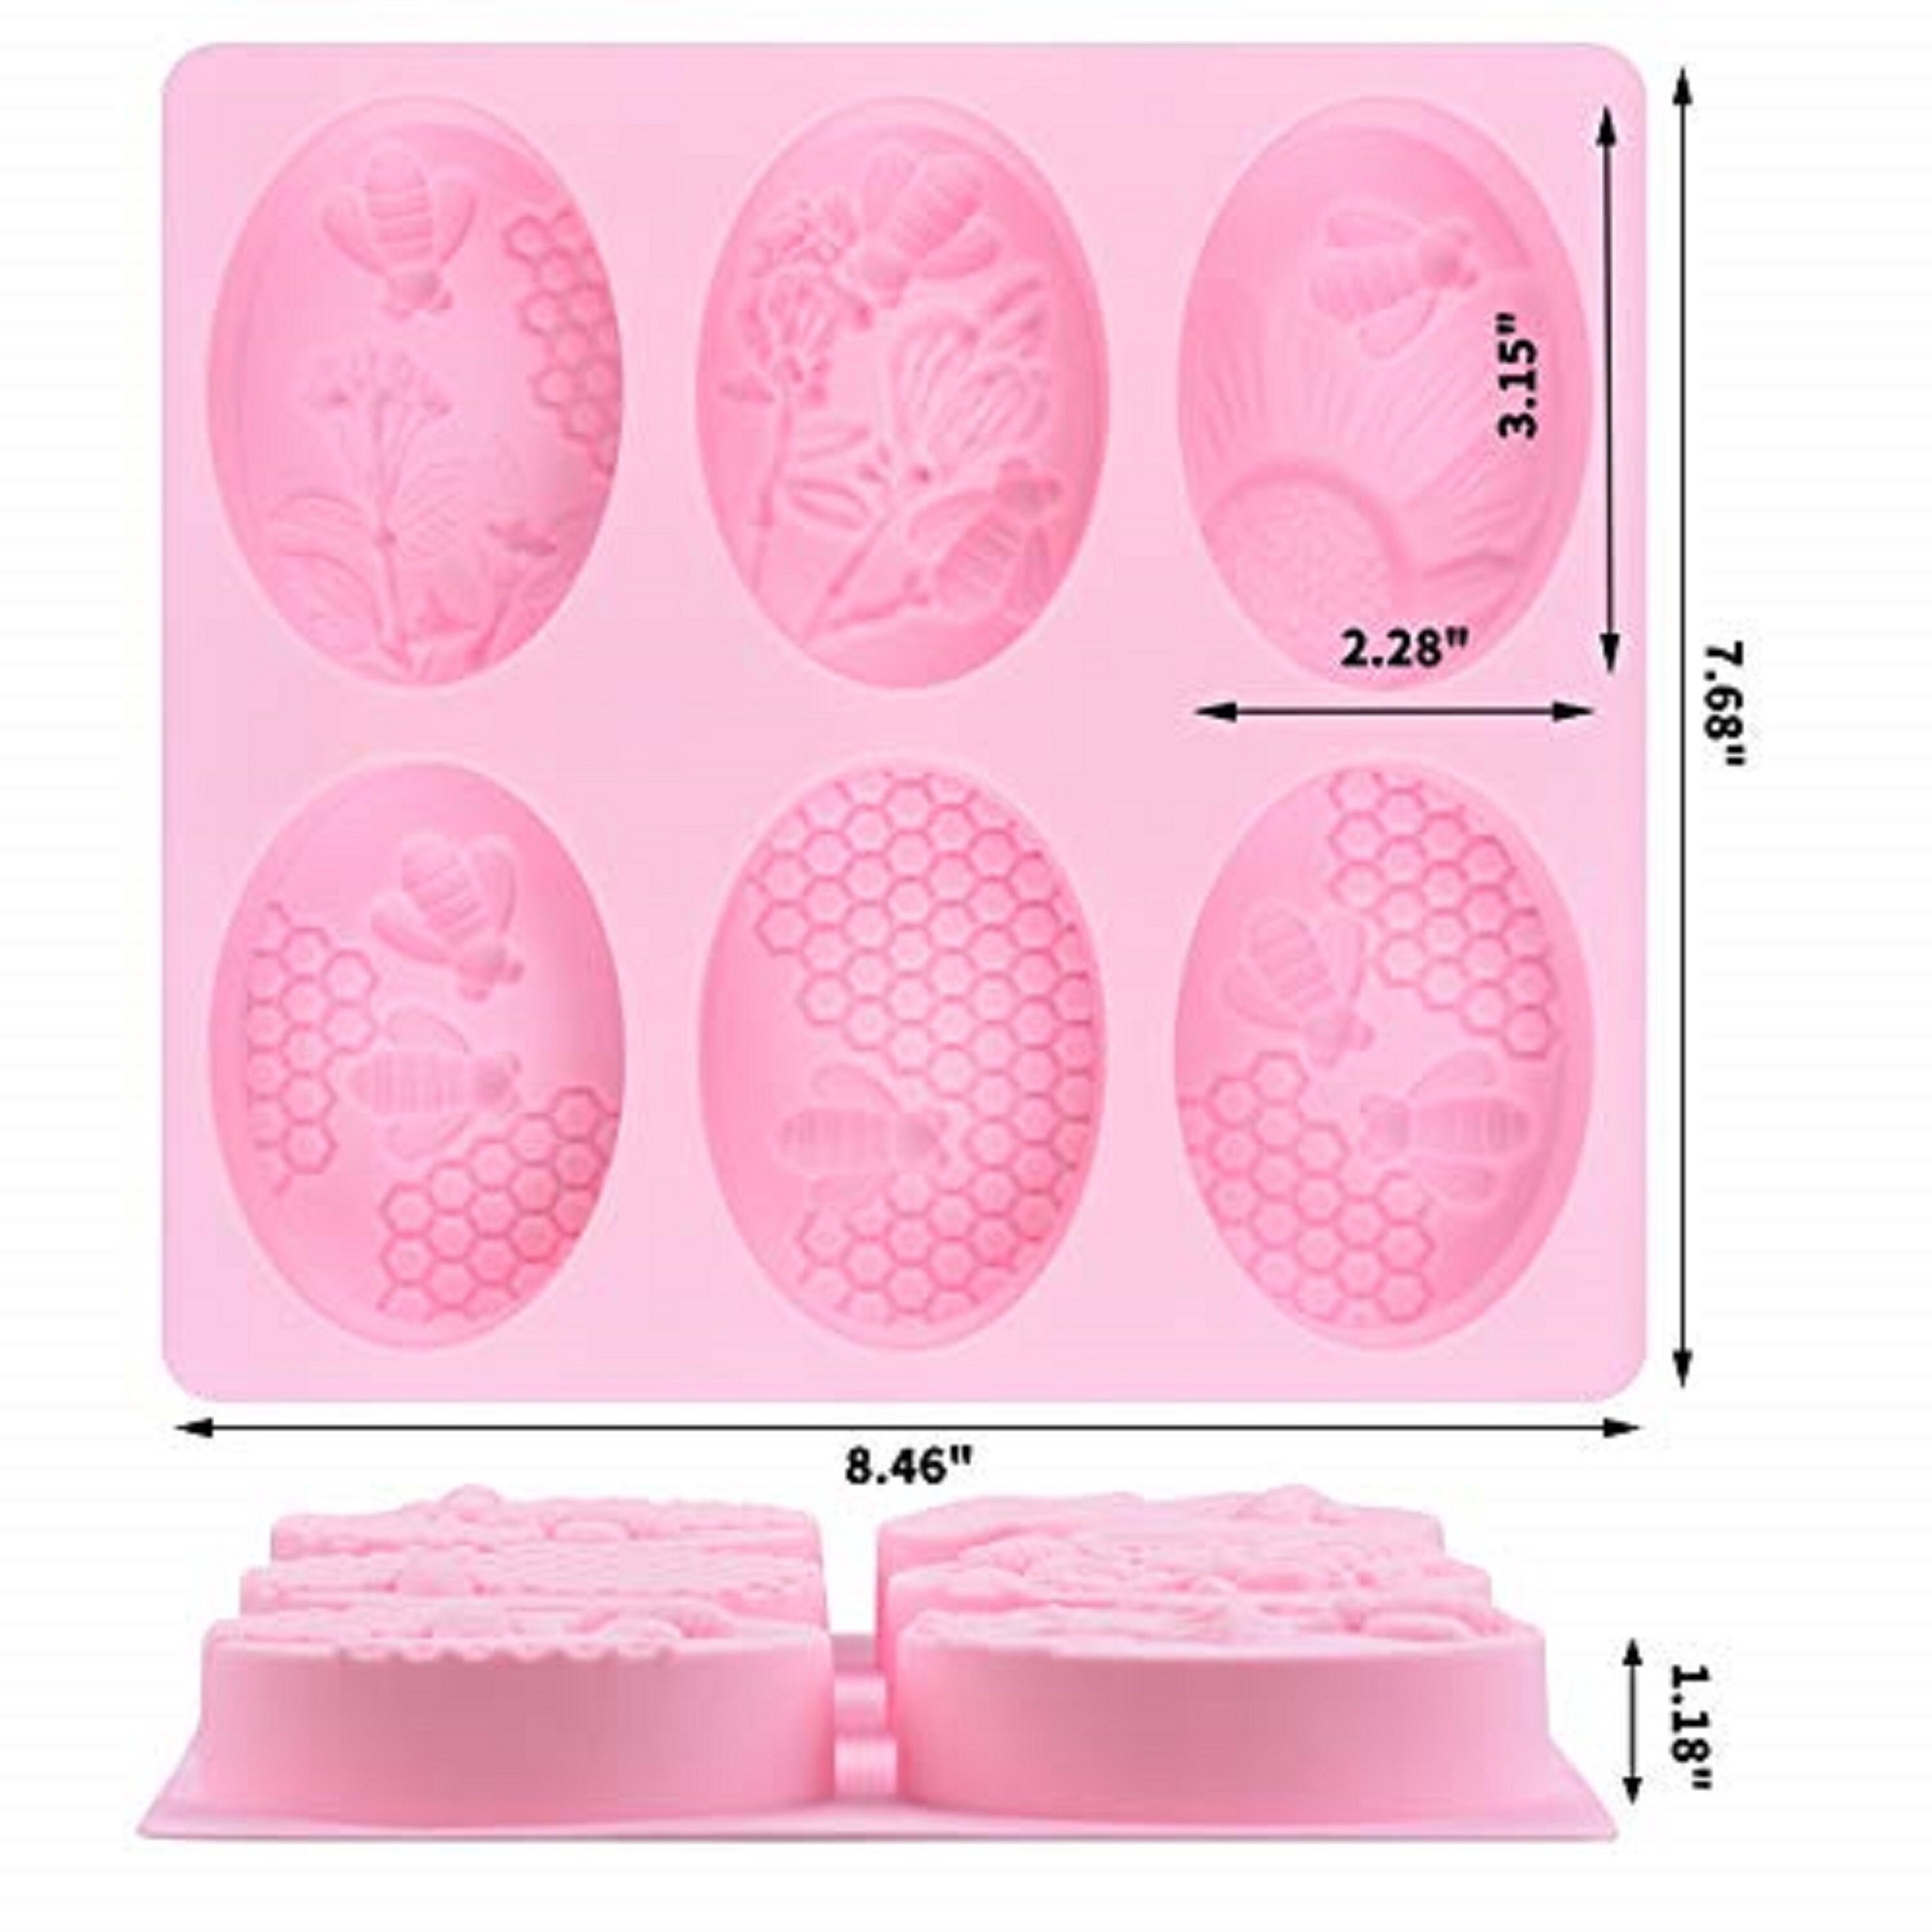 CandleScience 6 Bar Contoured Oval Silicone Soap Mold 1 PC Mold